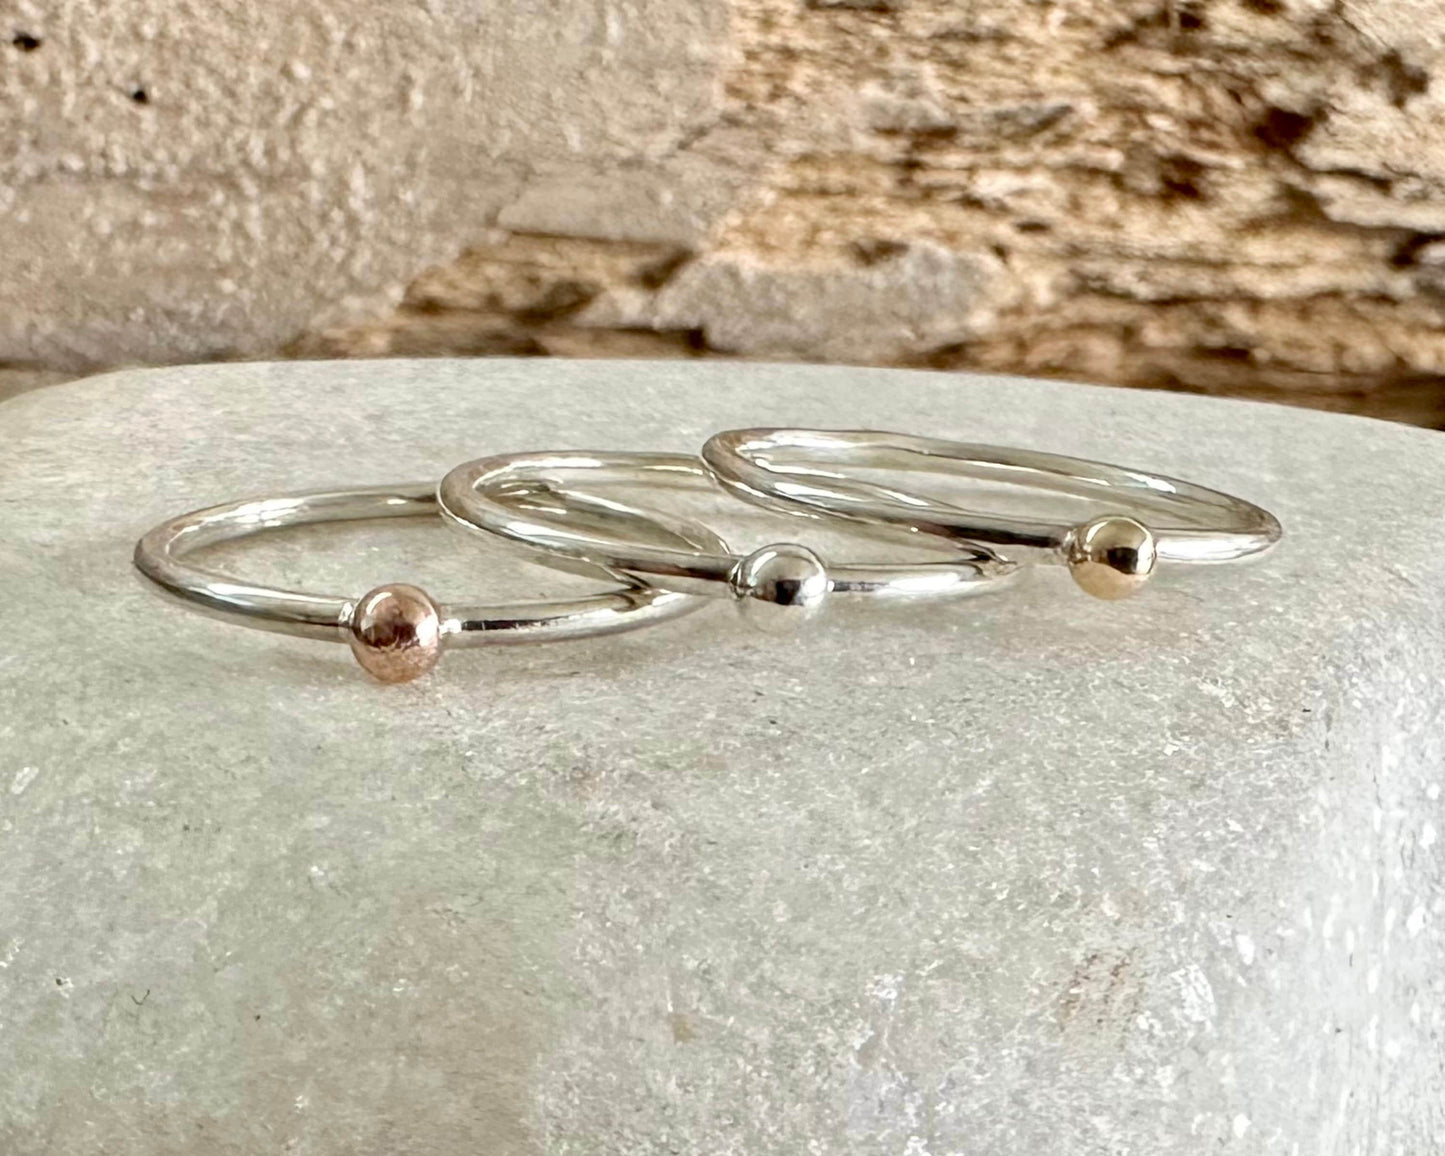 Solid Rose Gold Dot on 1.3mm 925 Sterling Silver Ring Band, Pebble Ring, Mixed Metal Recycled Stacking Ring, Red Gold